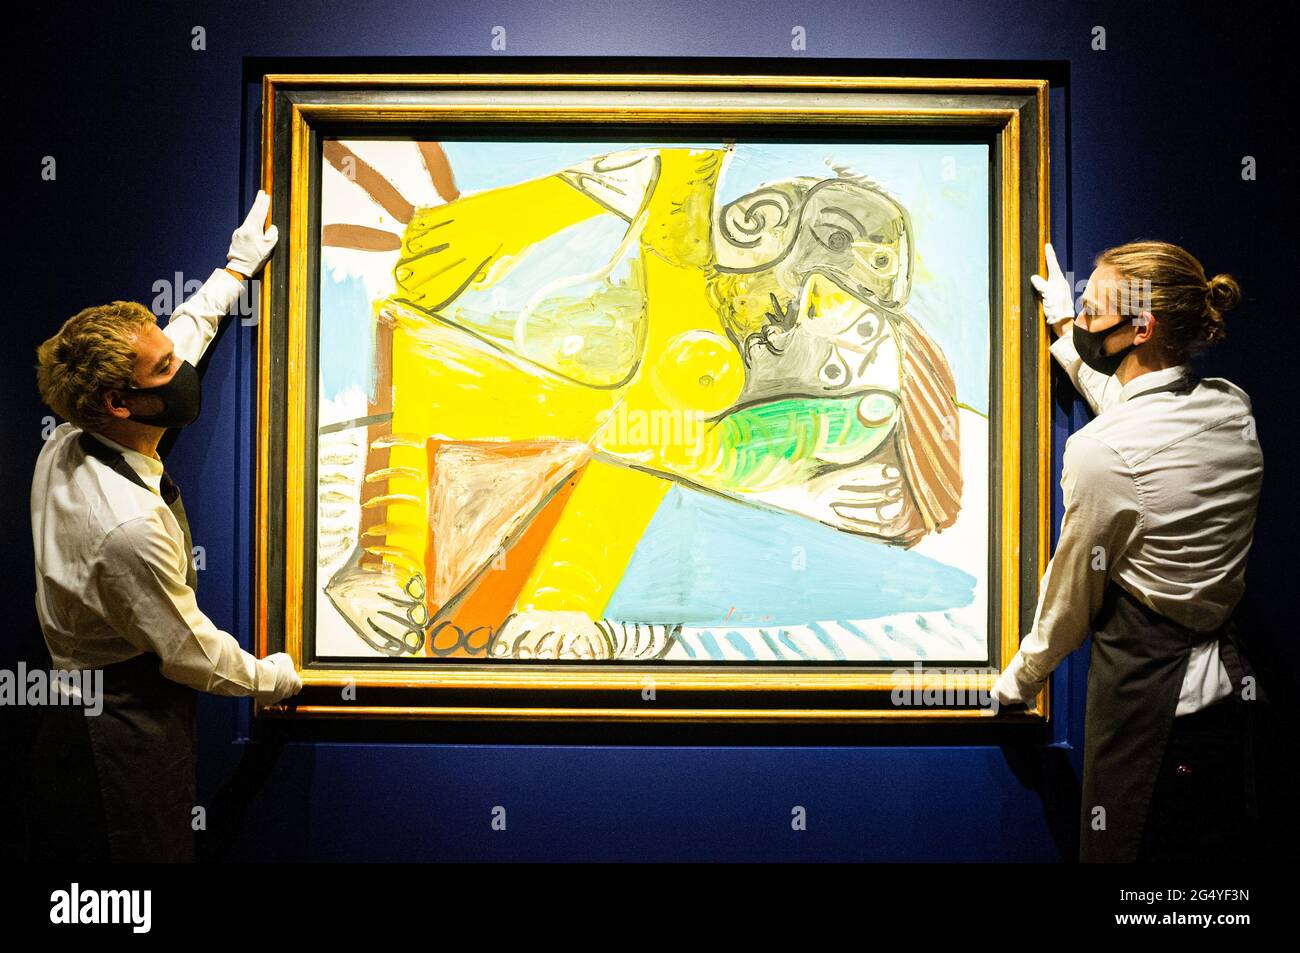 LONDON 24 June 2021. PABLO PICASSO (1881-1973) L'Étreinte oil on canvas. Painted in Mougins on 23 October 1969 Estimate GBP 11,000,000 - GBP 16,000,000. The sale takes place on 30 June.  IMAGES ARE ASKED TO BE UNDER EMBARGO UNTIL 10:30 AM. Credit amer ghazzal/Alamy Live News Stock Photo